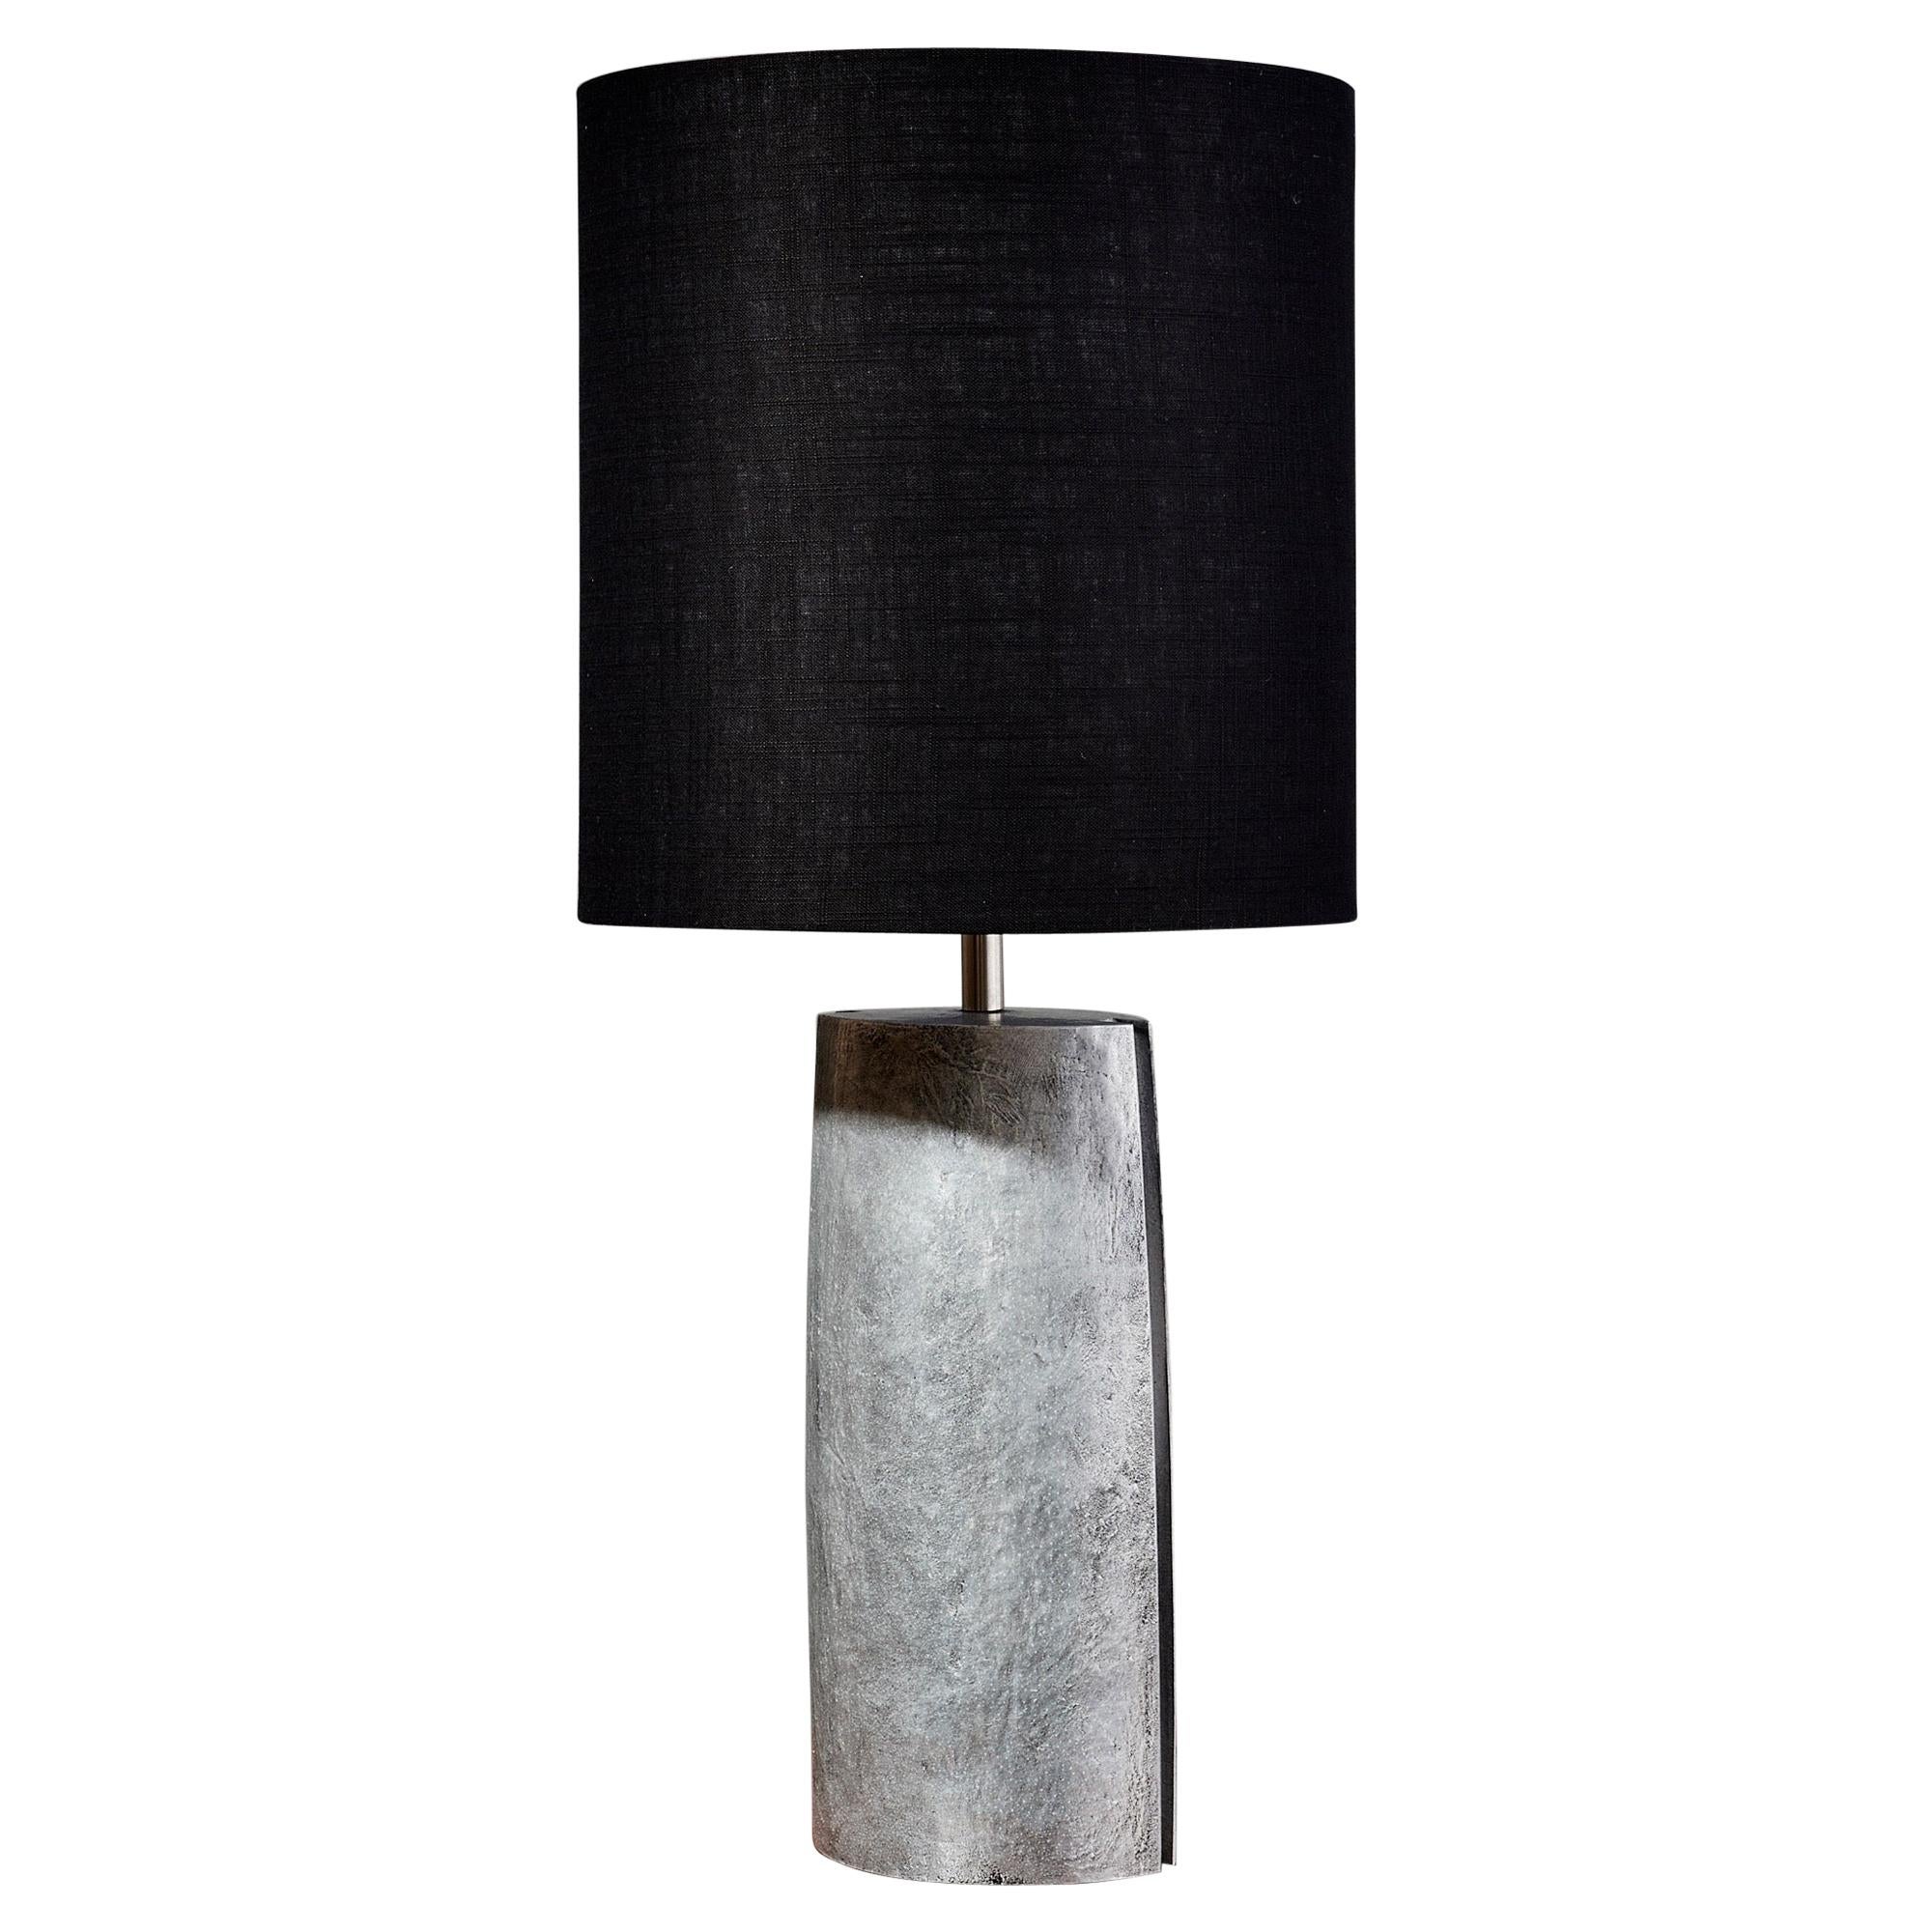 Brutalist Table Lamp in Silver Textured Aluminium with Black Shade, Italy 1970's For Sale